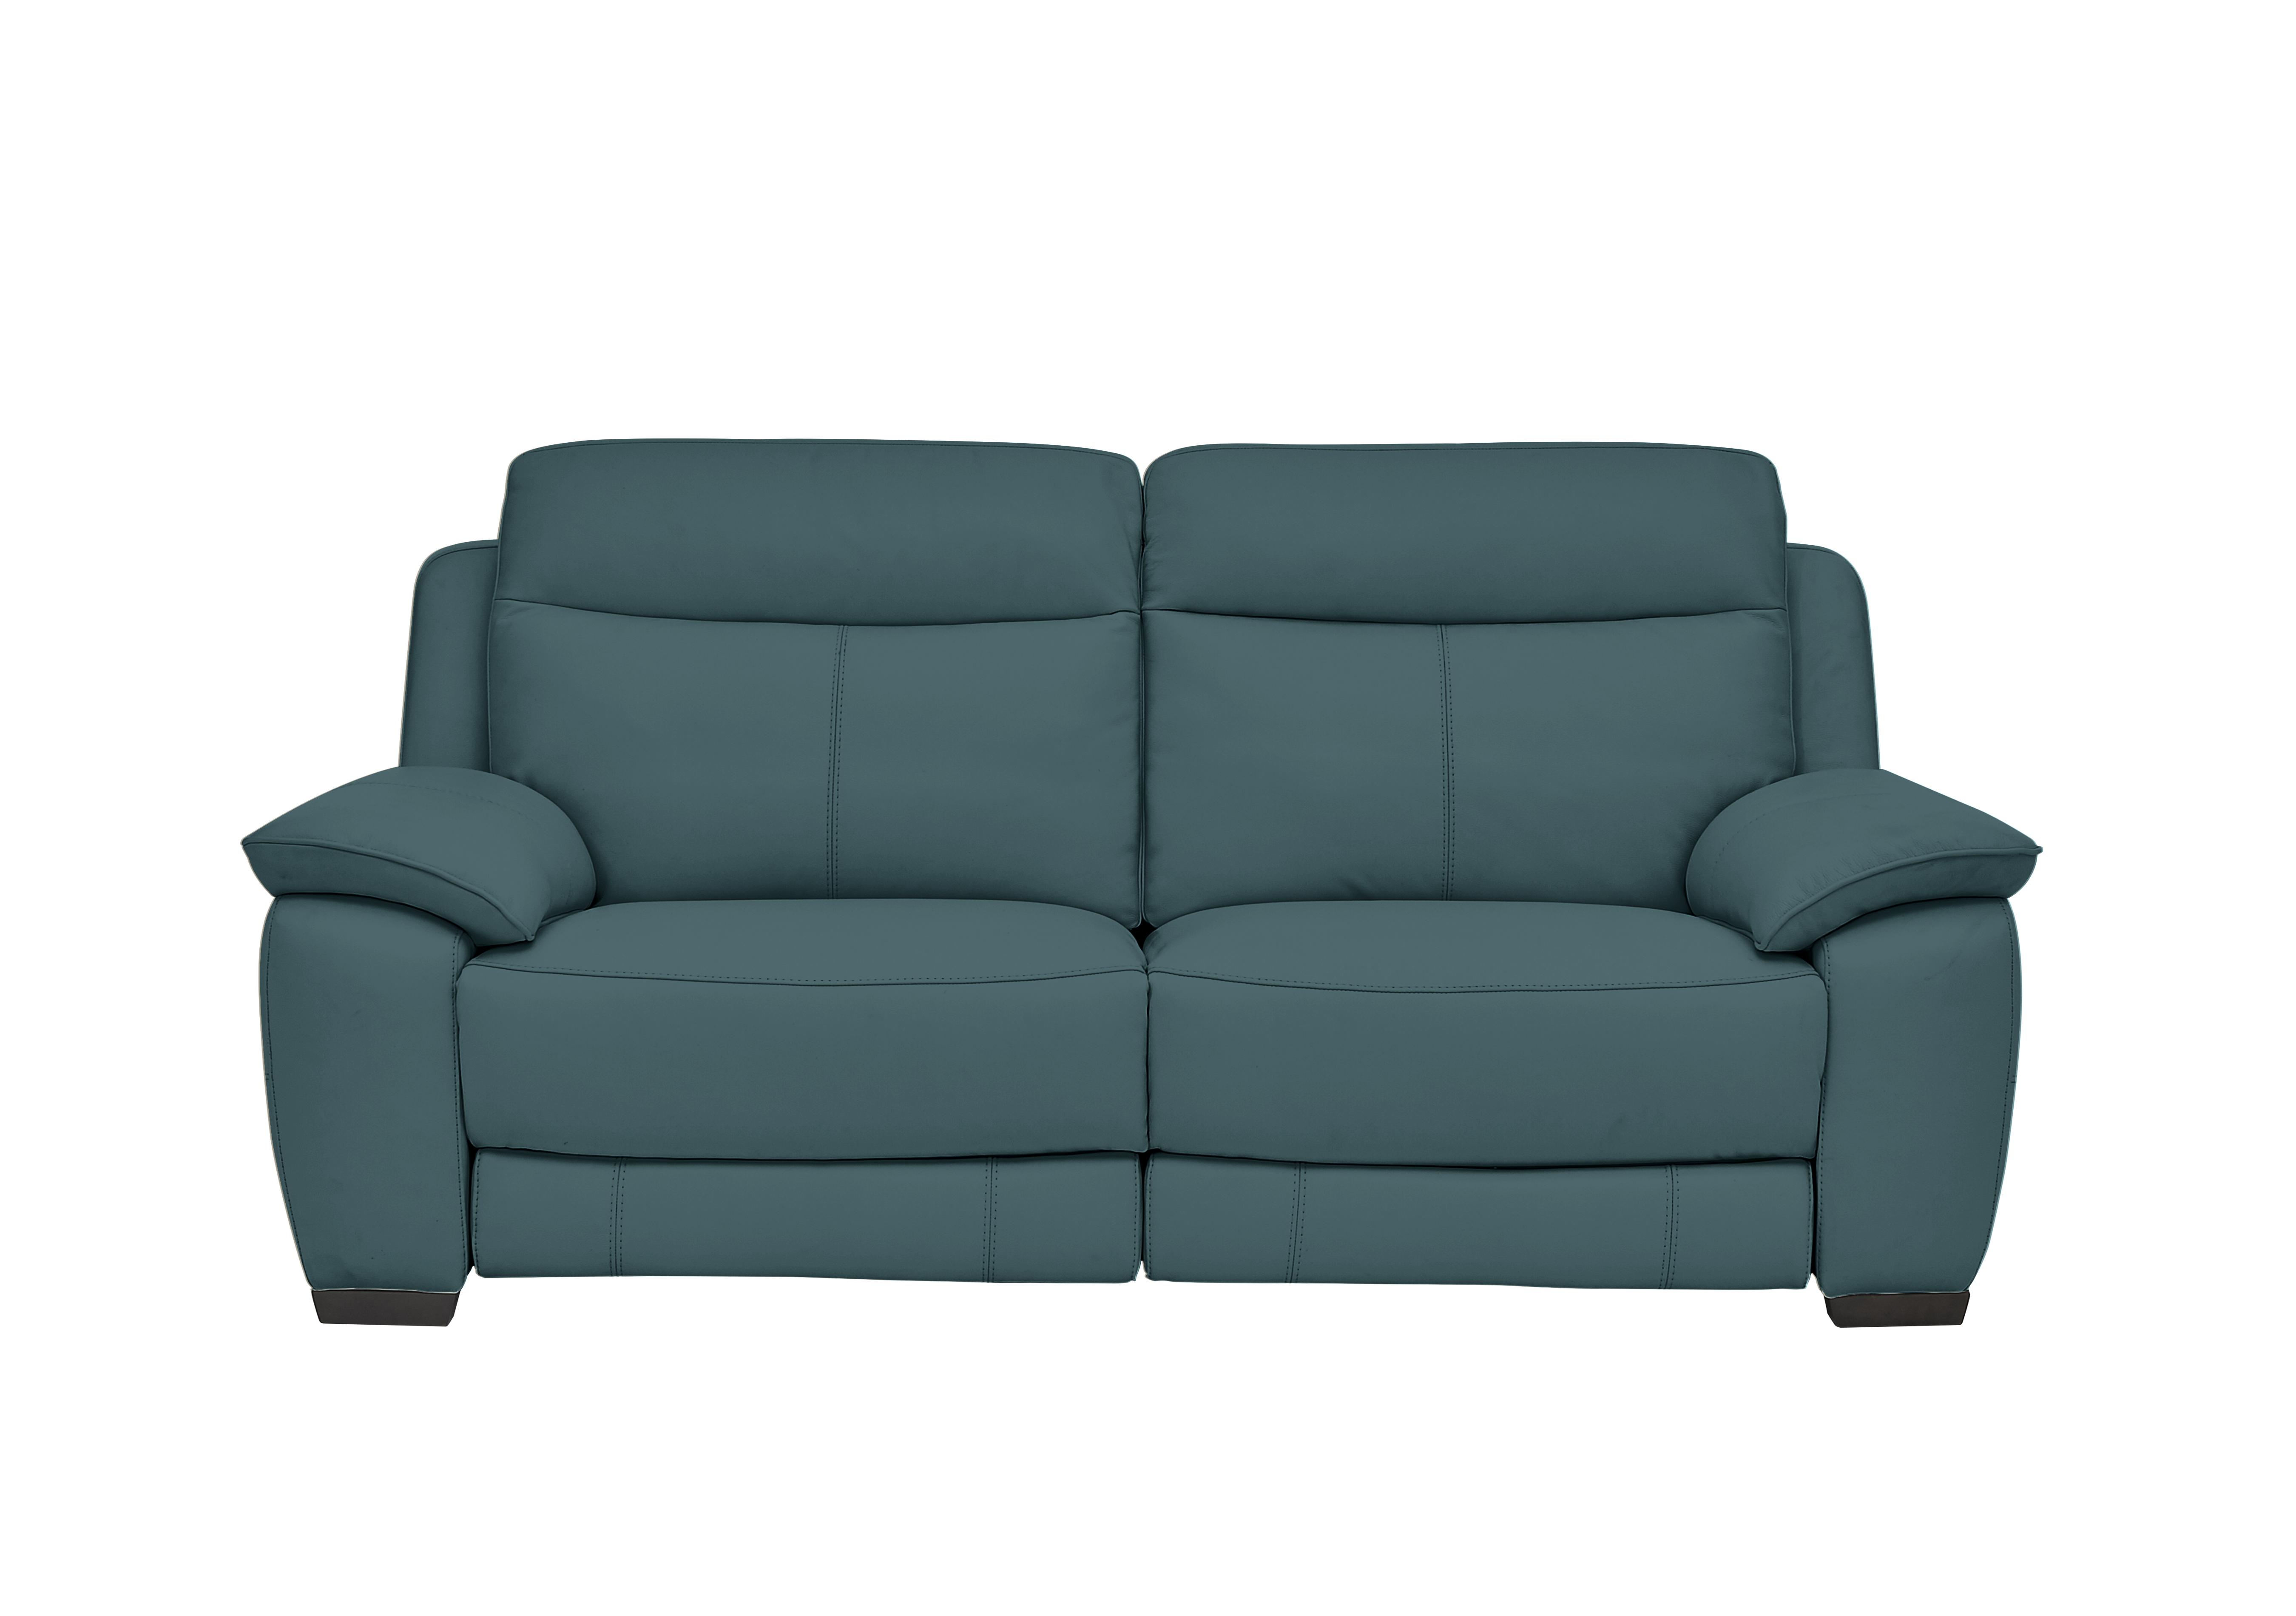 Starlight Express 3 Seater Leather Sofa in Bv-301e Lake Green on Furniture Village